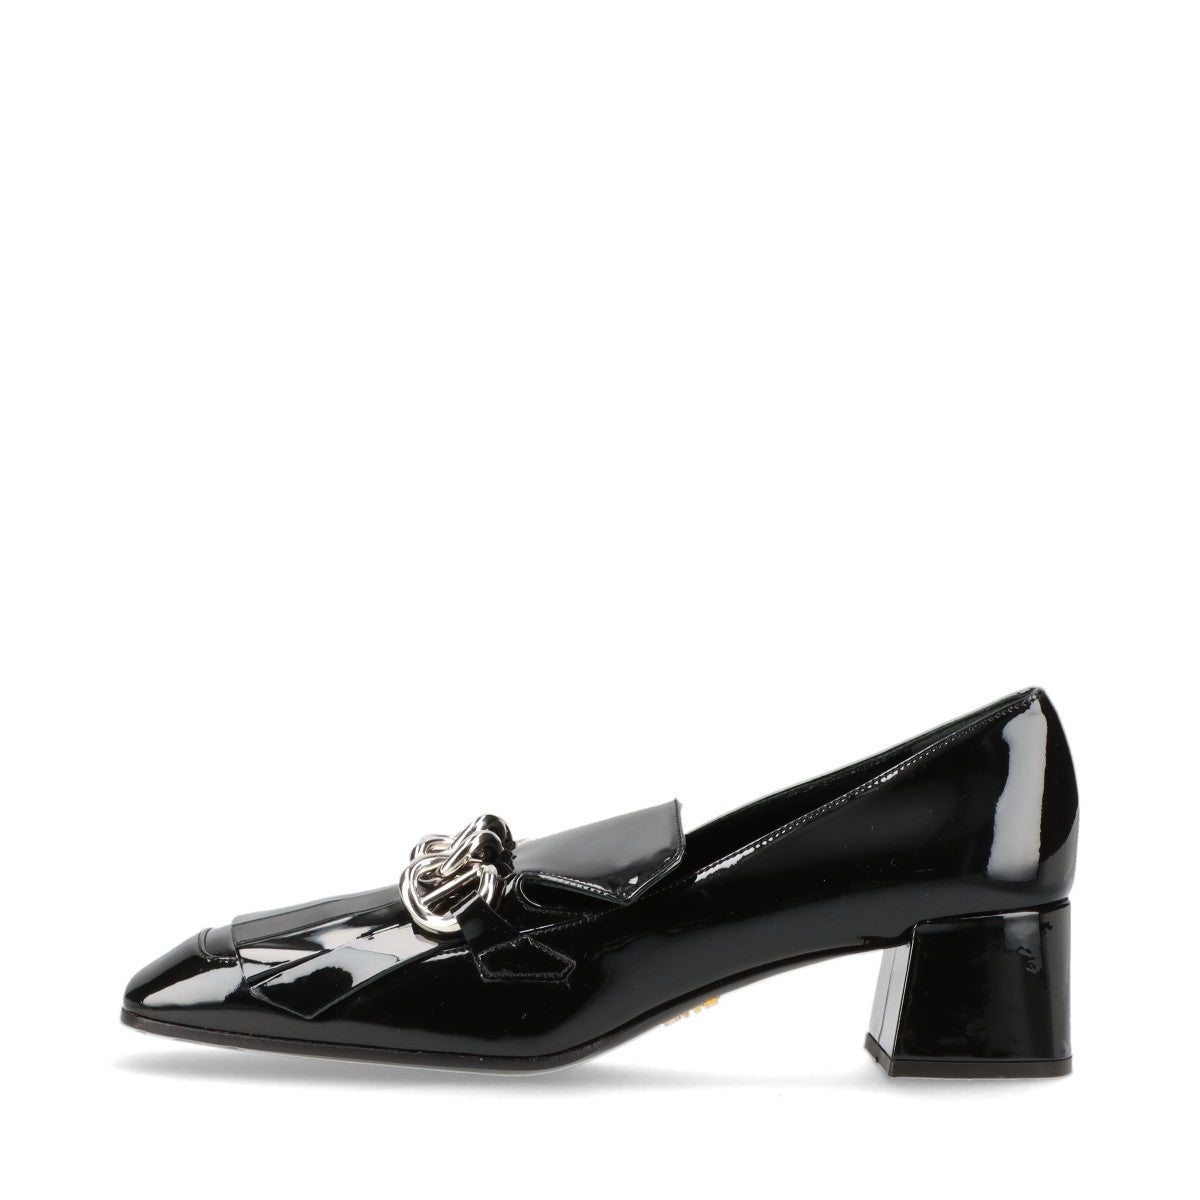 Prada Patent Leather Loafer EU38.5 Ladies' Black Fringe Chain There is a bag